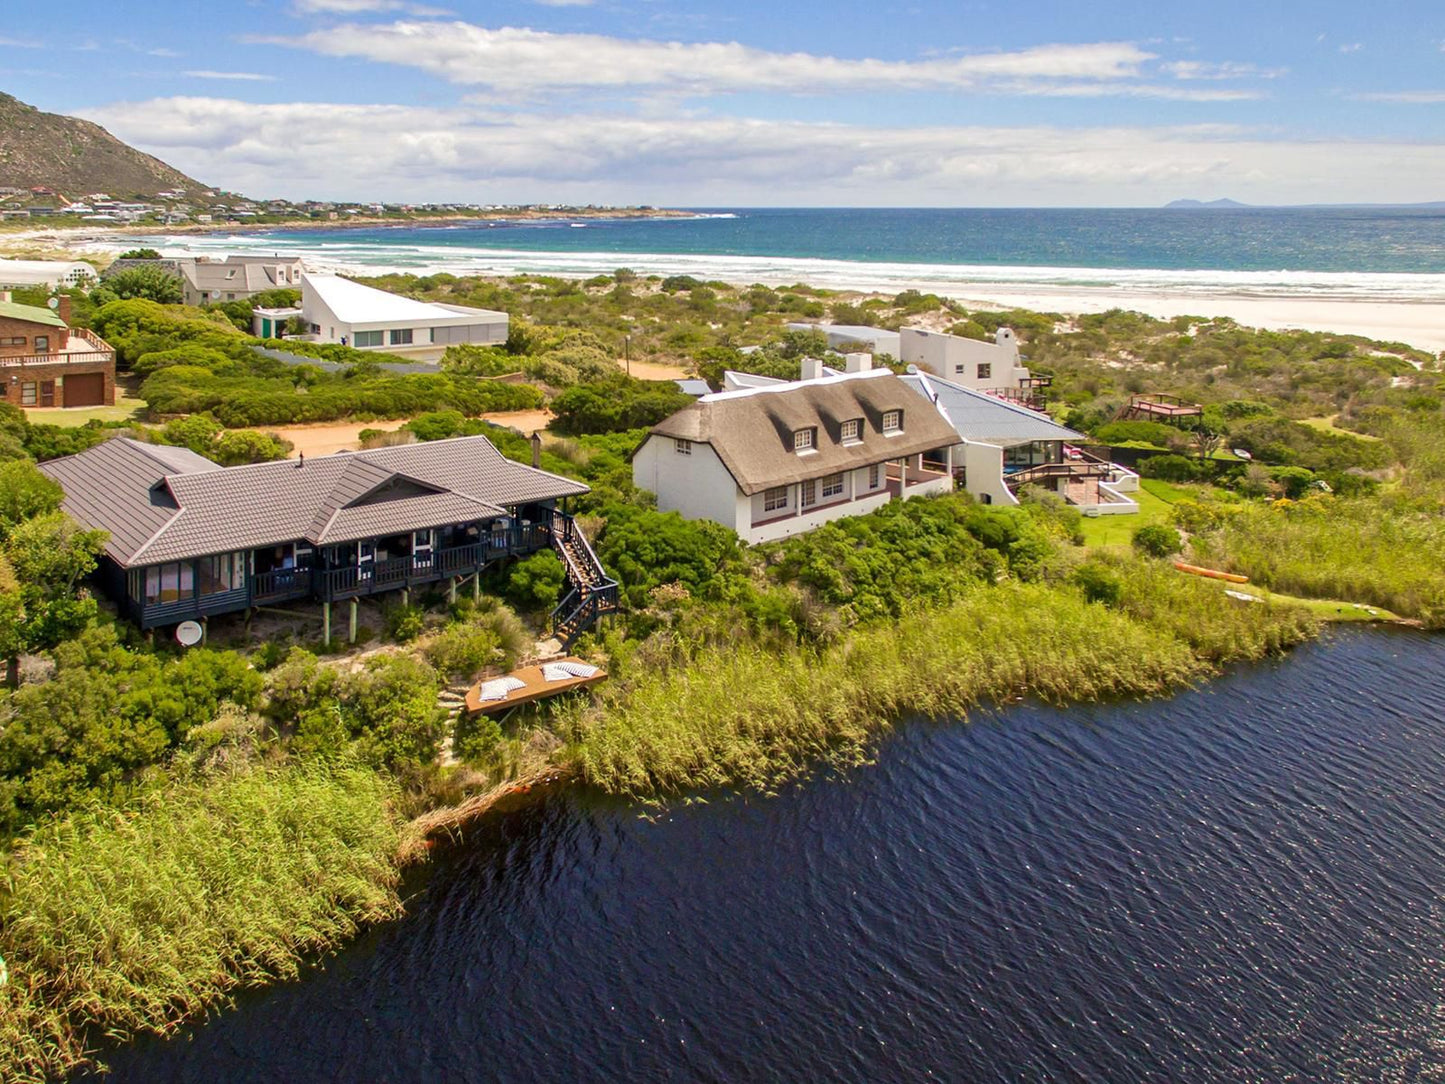 Moon River House Pringle Bay Western Cape South Africa Beach, Nature, Sand, House, Building, Architecture, Island